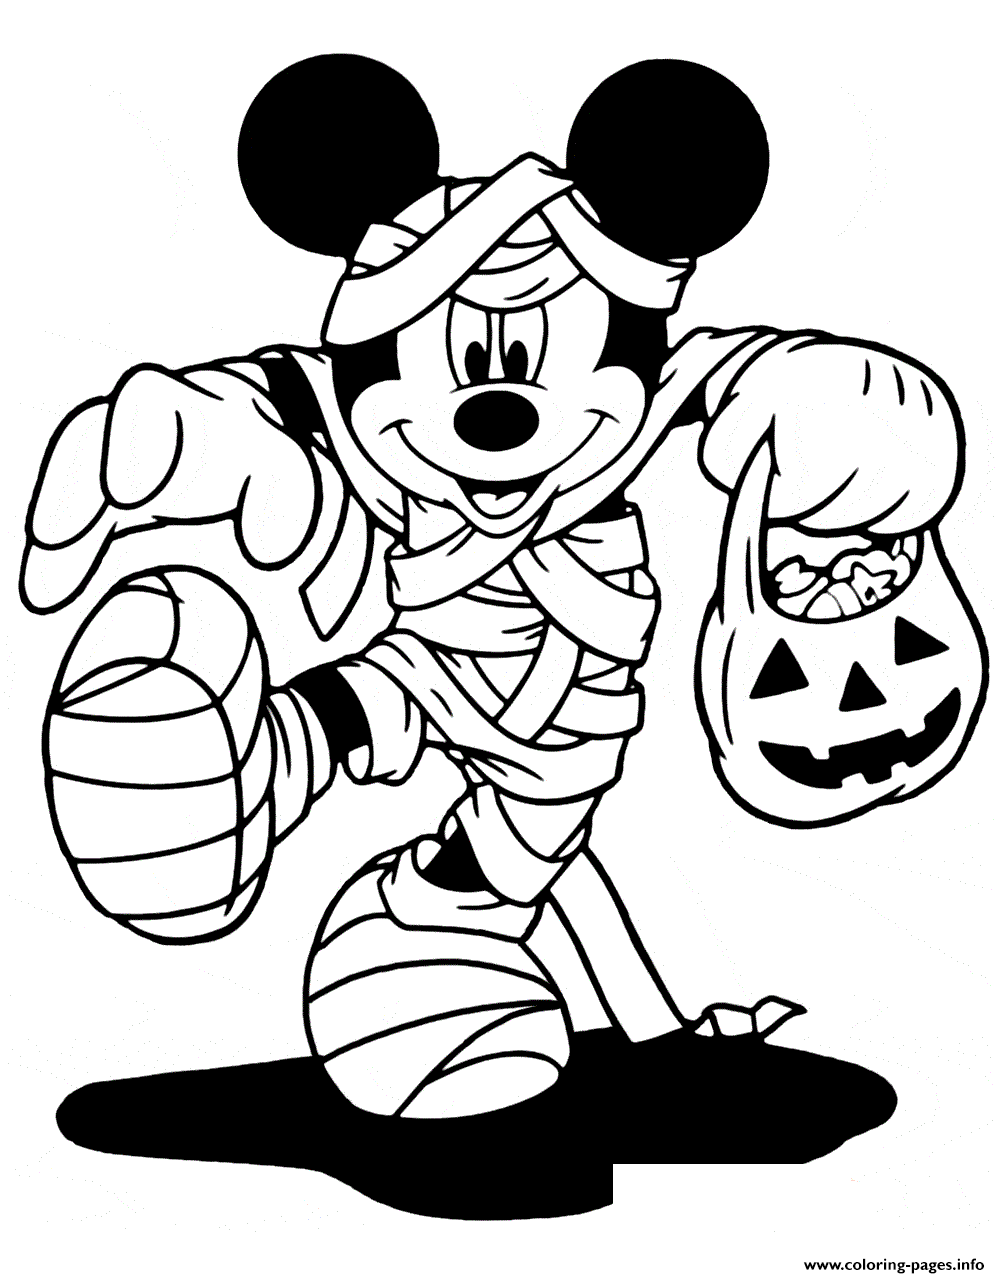 Trick Or Treats With Mickey The Mummy para colorir